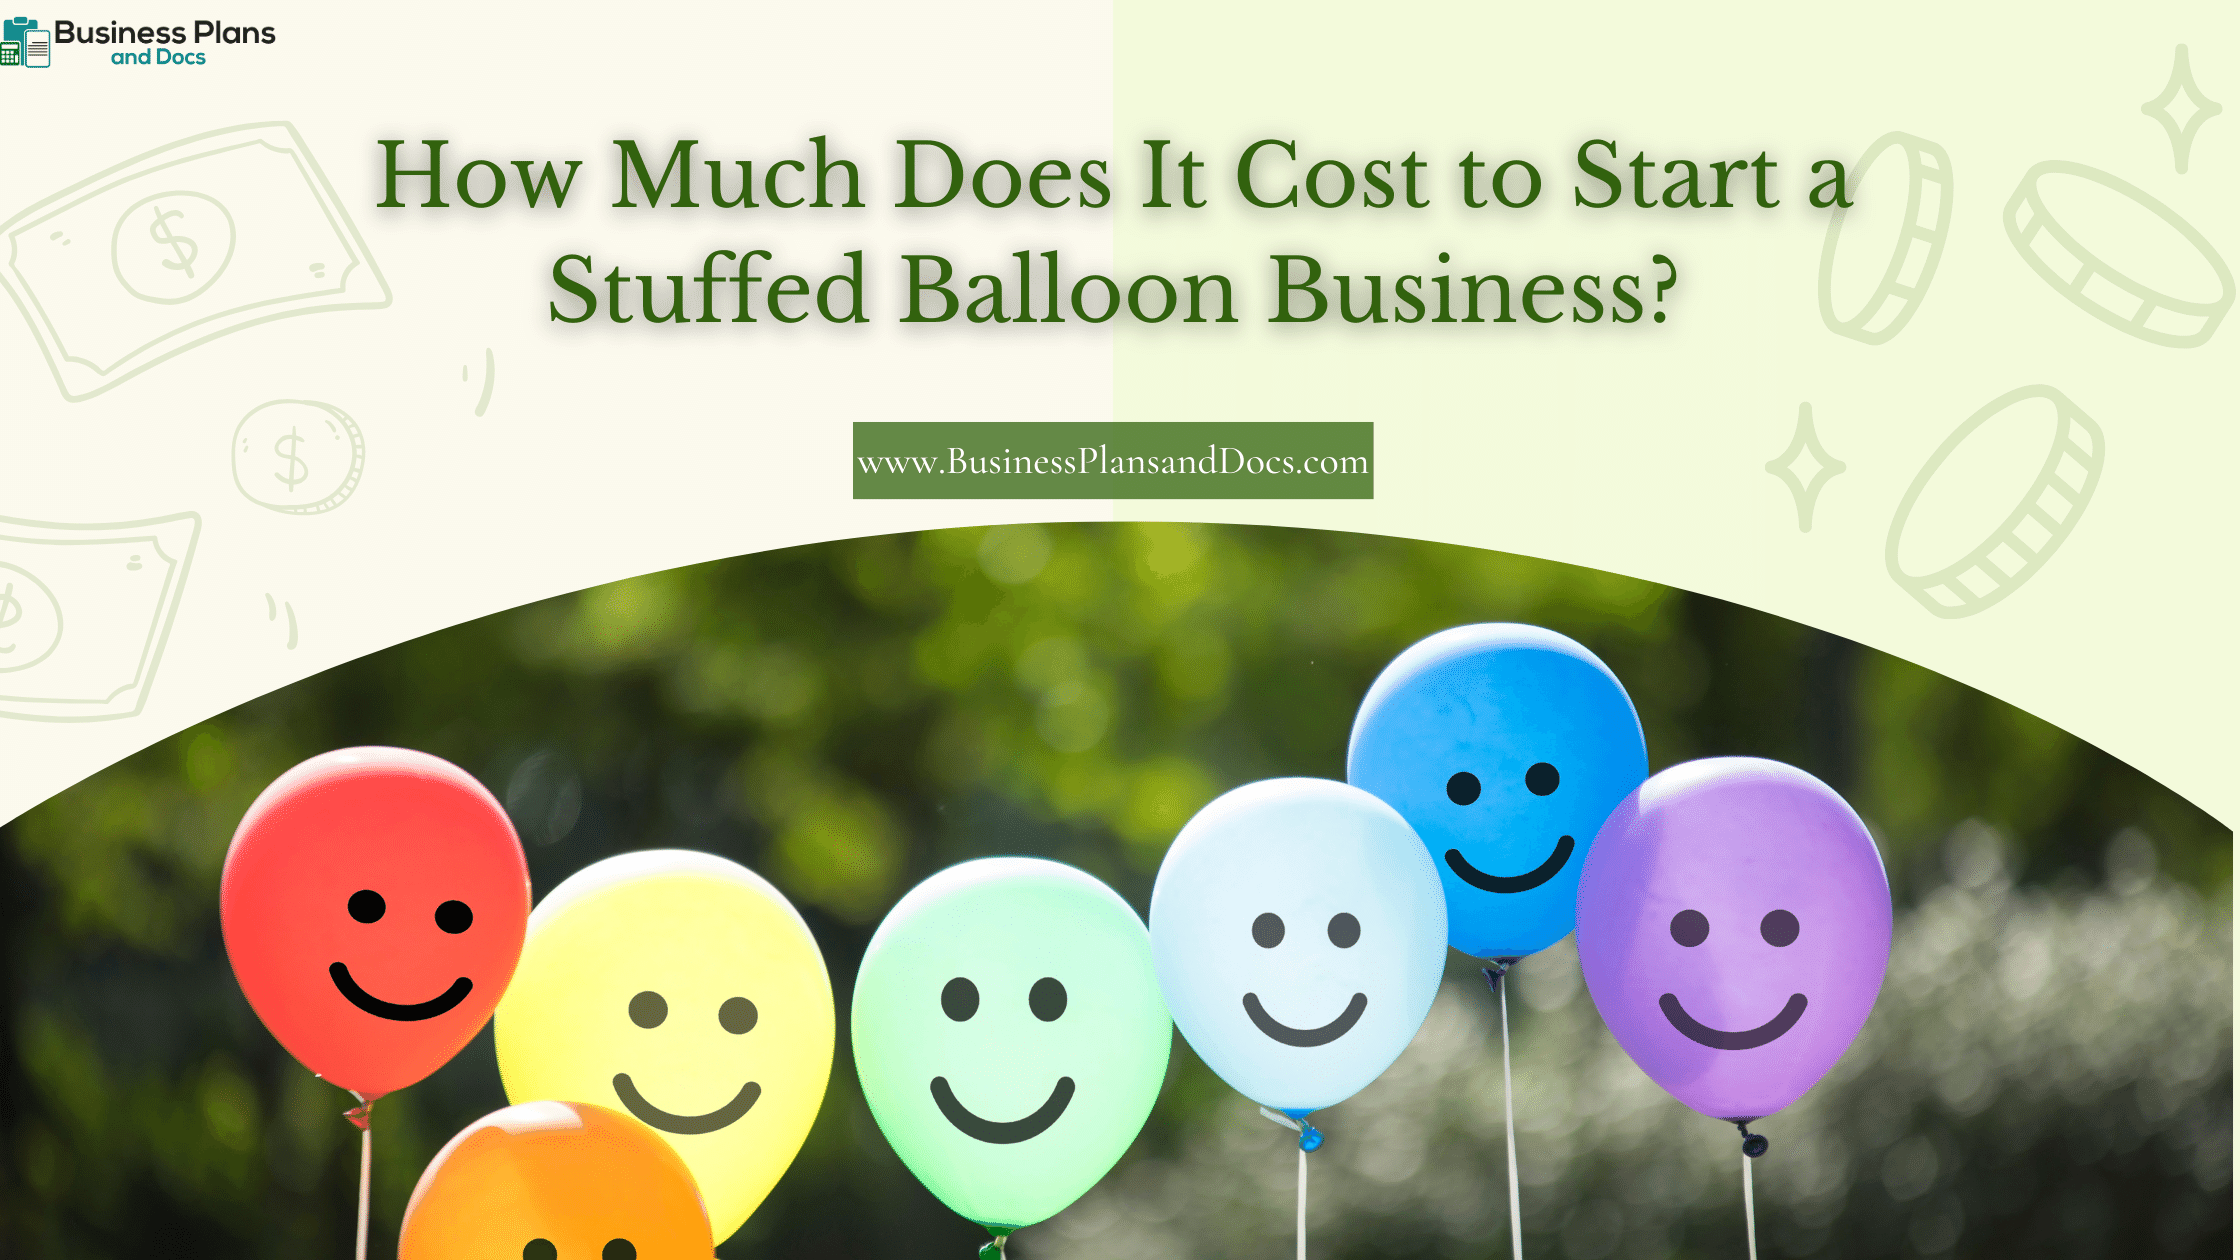 How Much Does It Cost to Start a Stuffed Balloon Business?